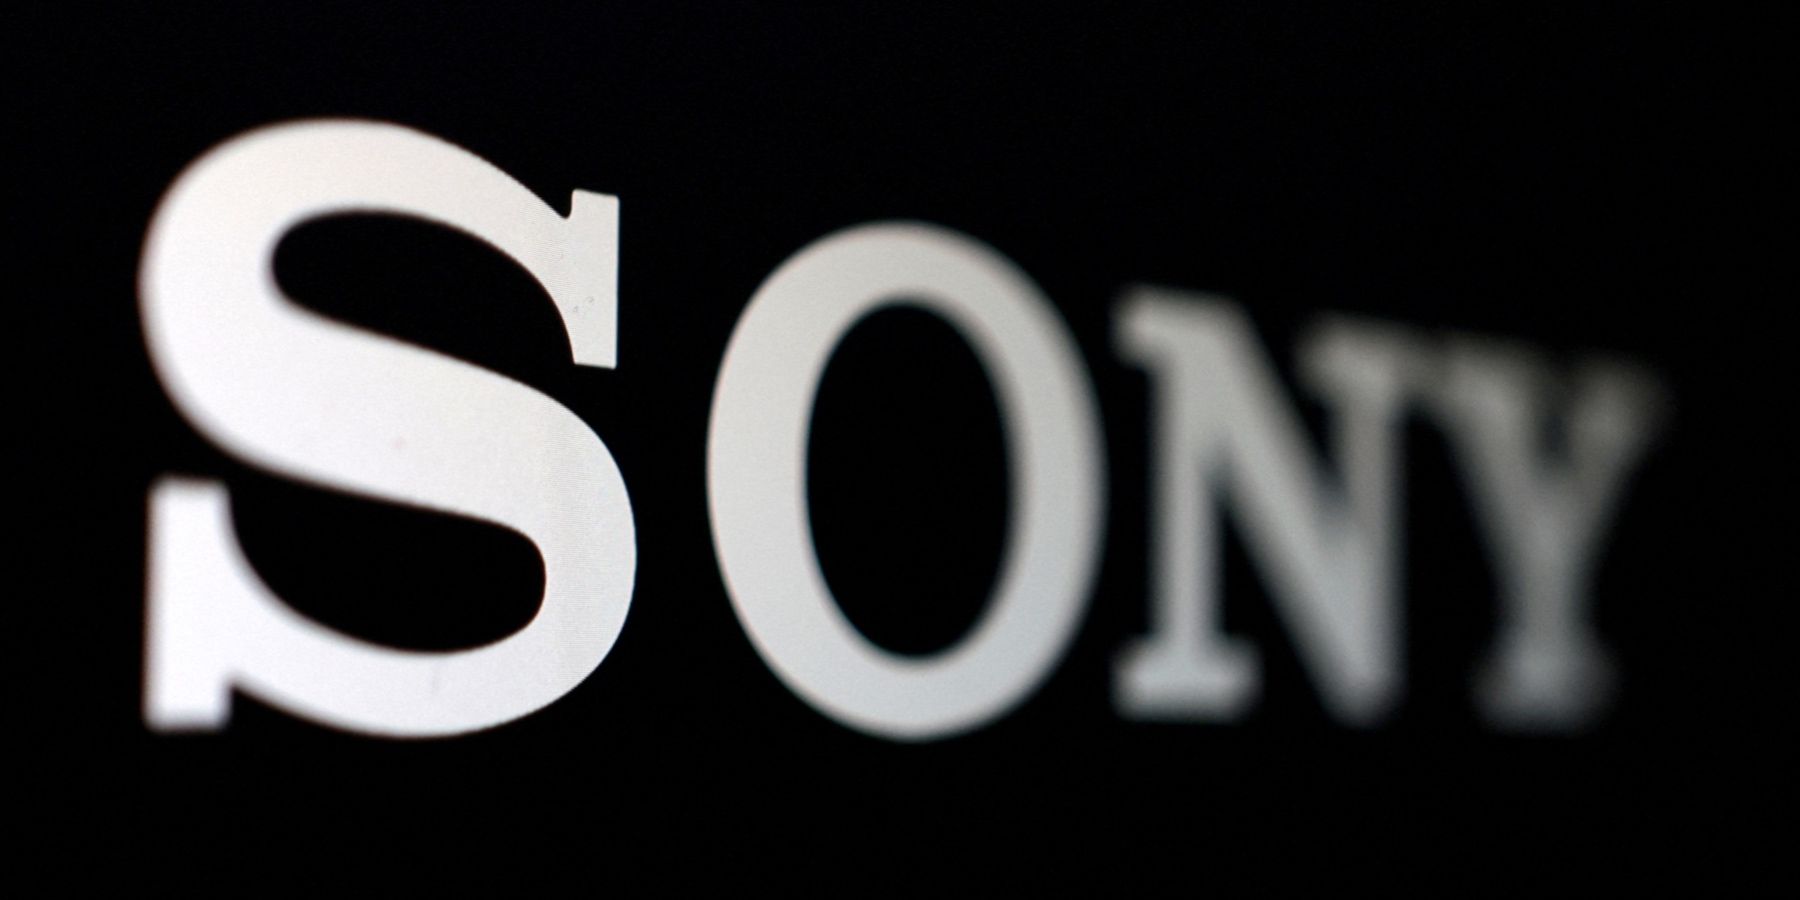 Sony May Start Modifying Voice Messages to Filter Out Strong Emotions